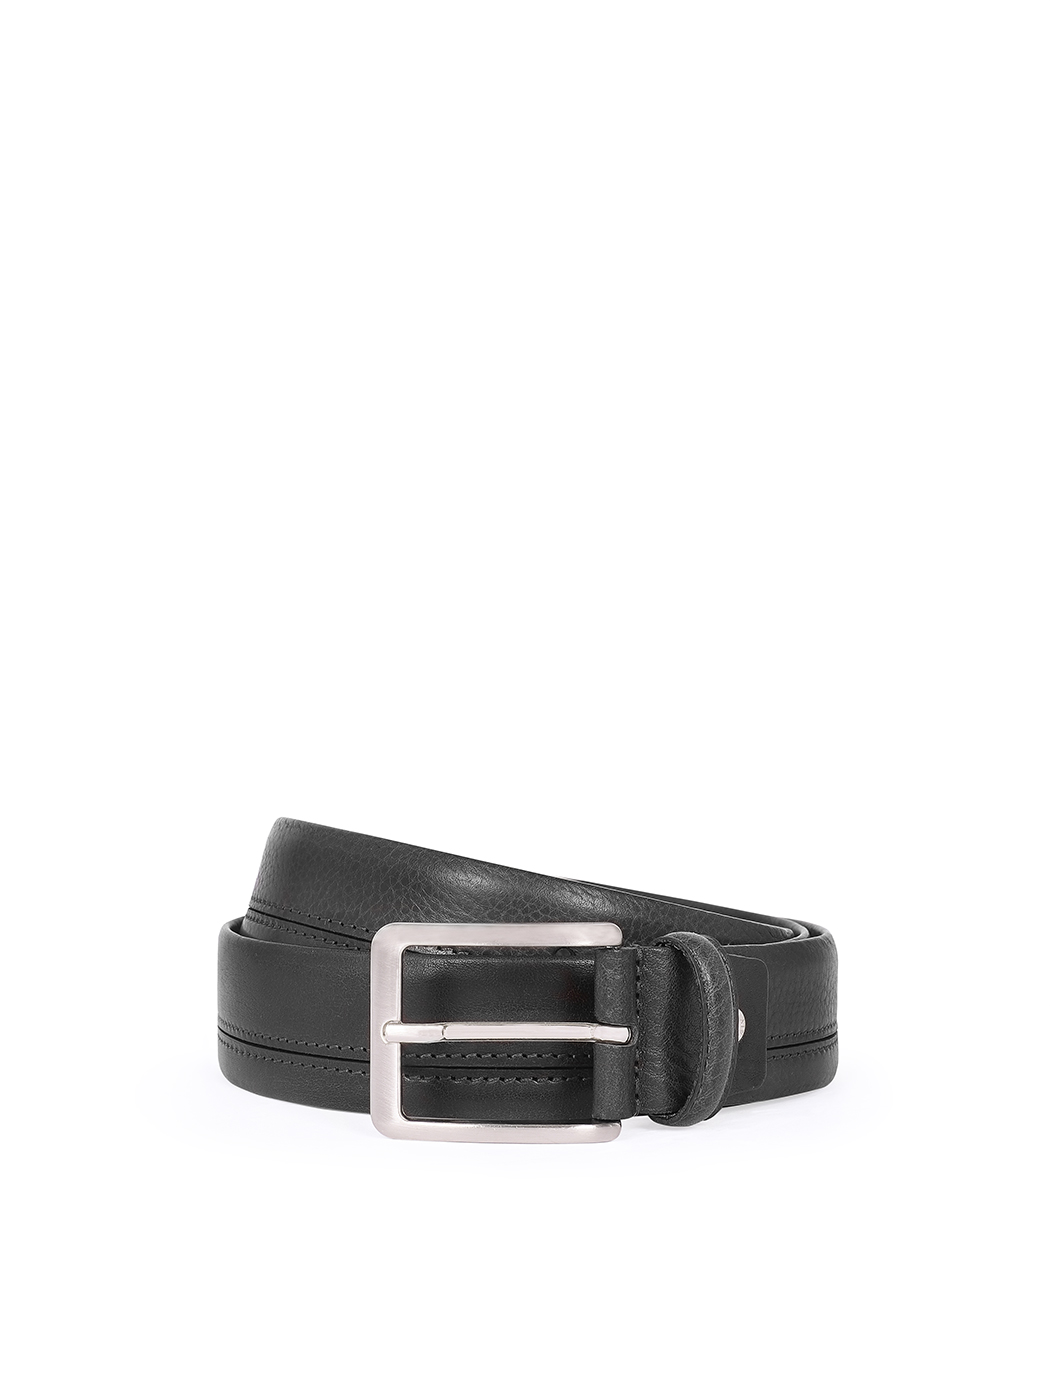 Classic black leather belt with stitching